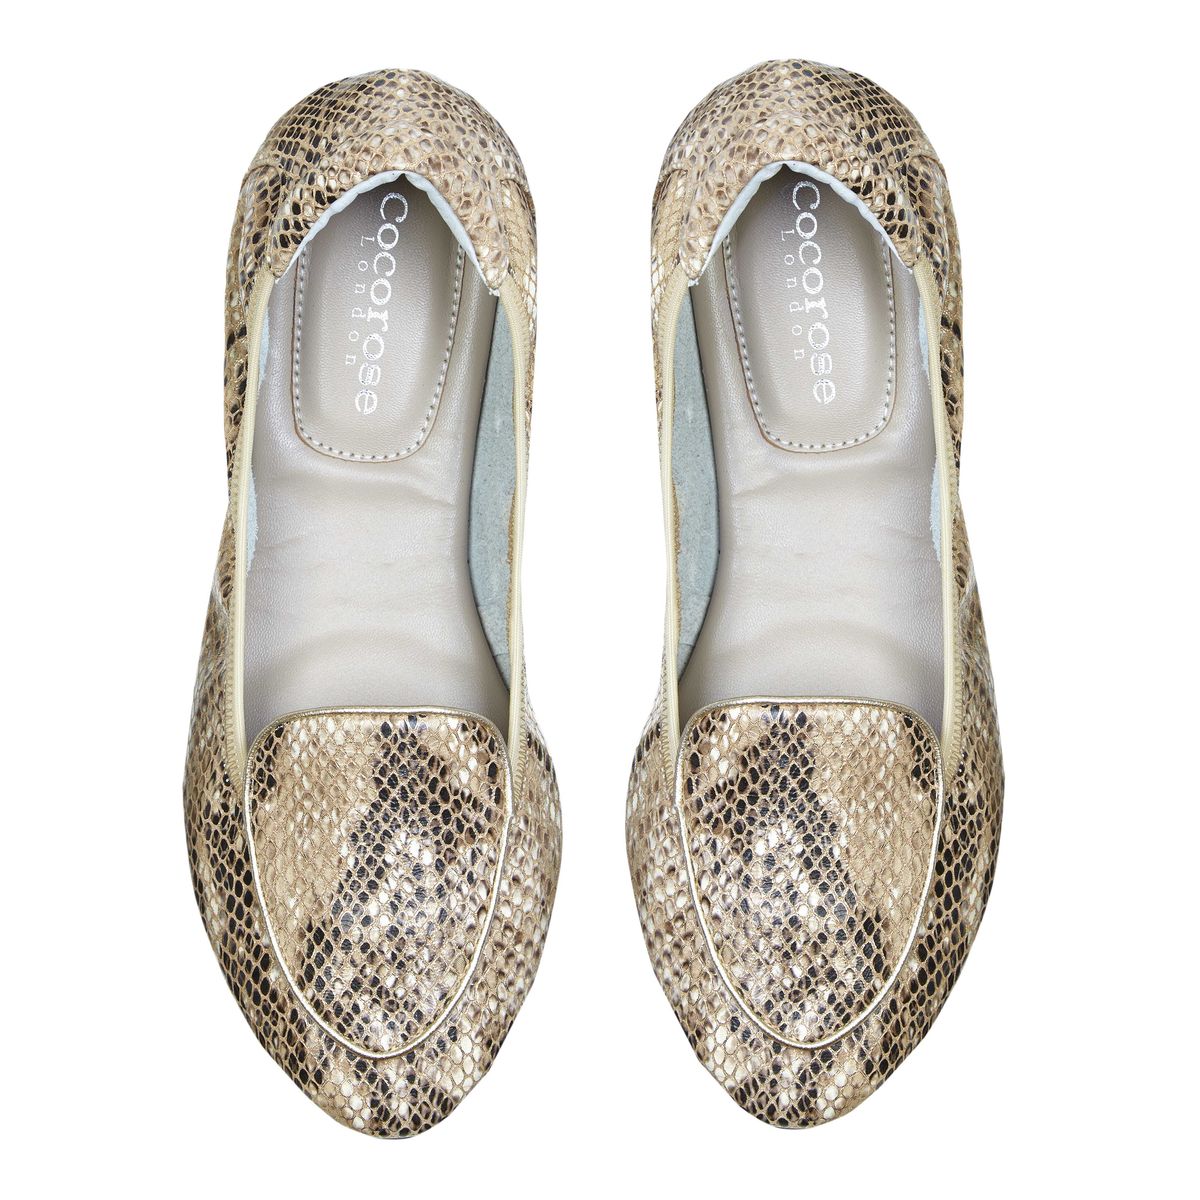 Clapham Champagne Snake Print loafer from Cocorose London